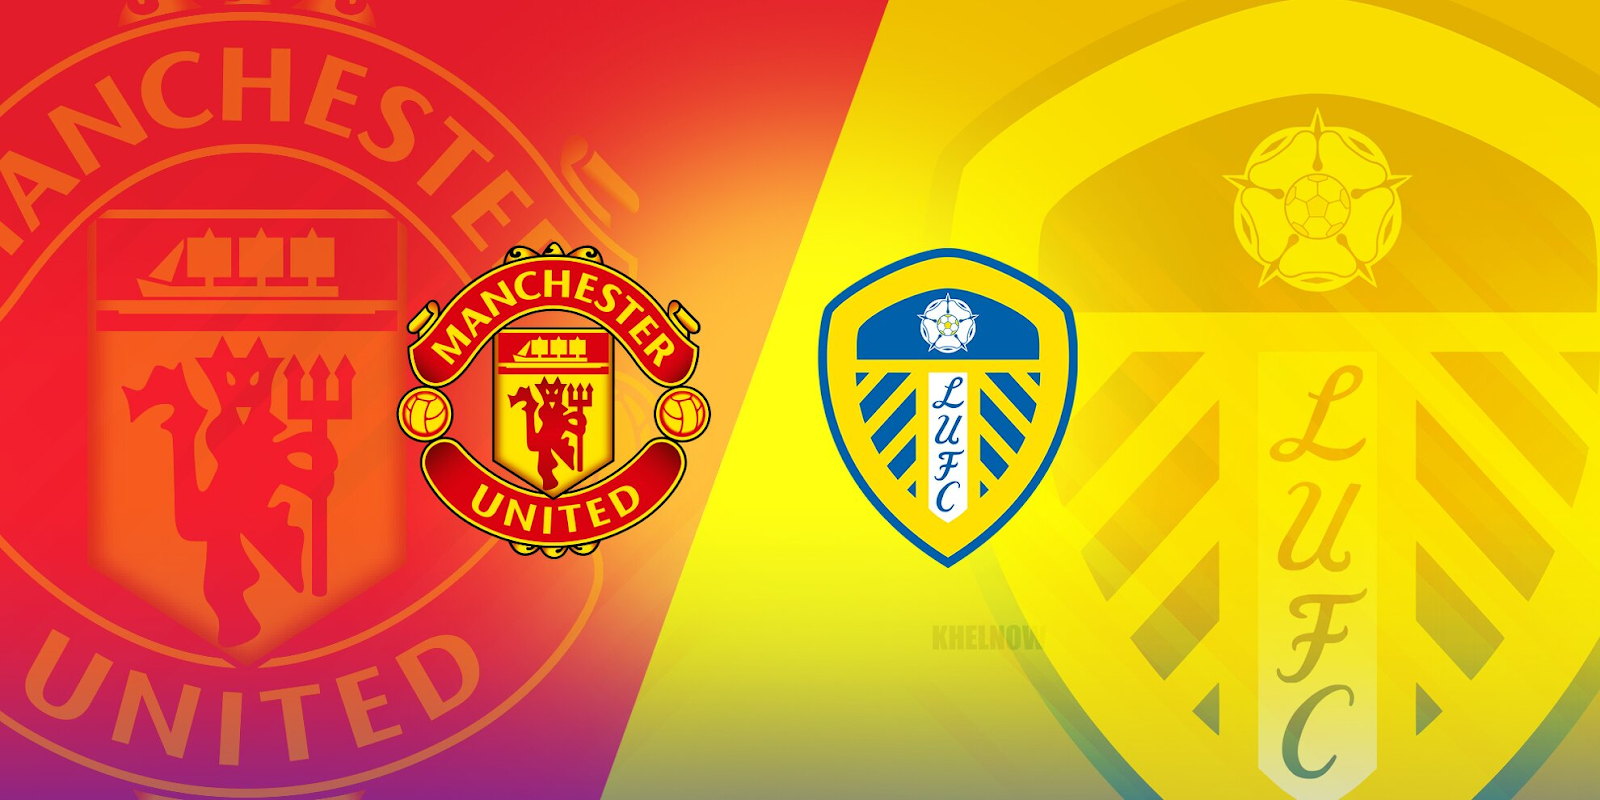 Leeds United and Manchester United